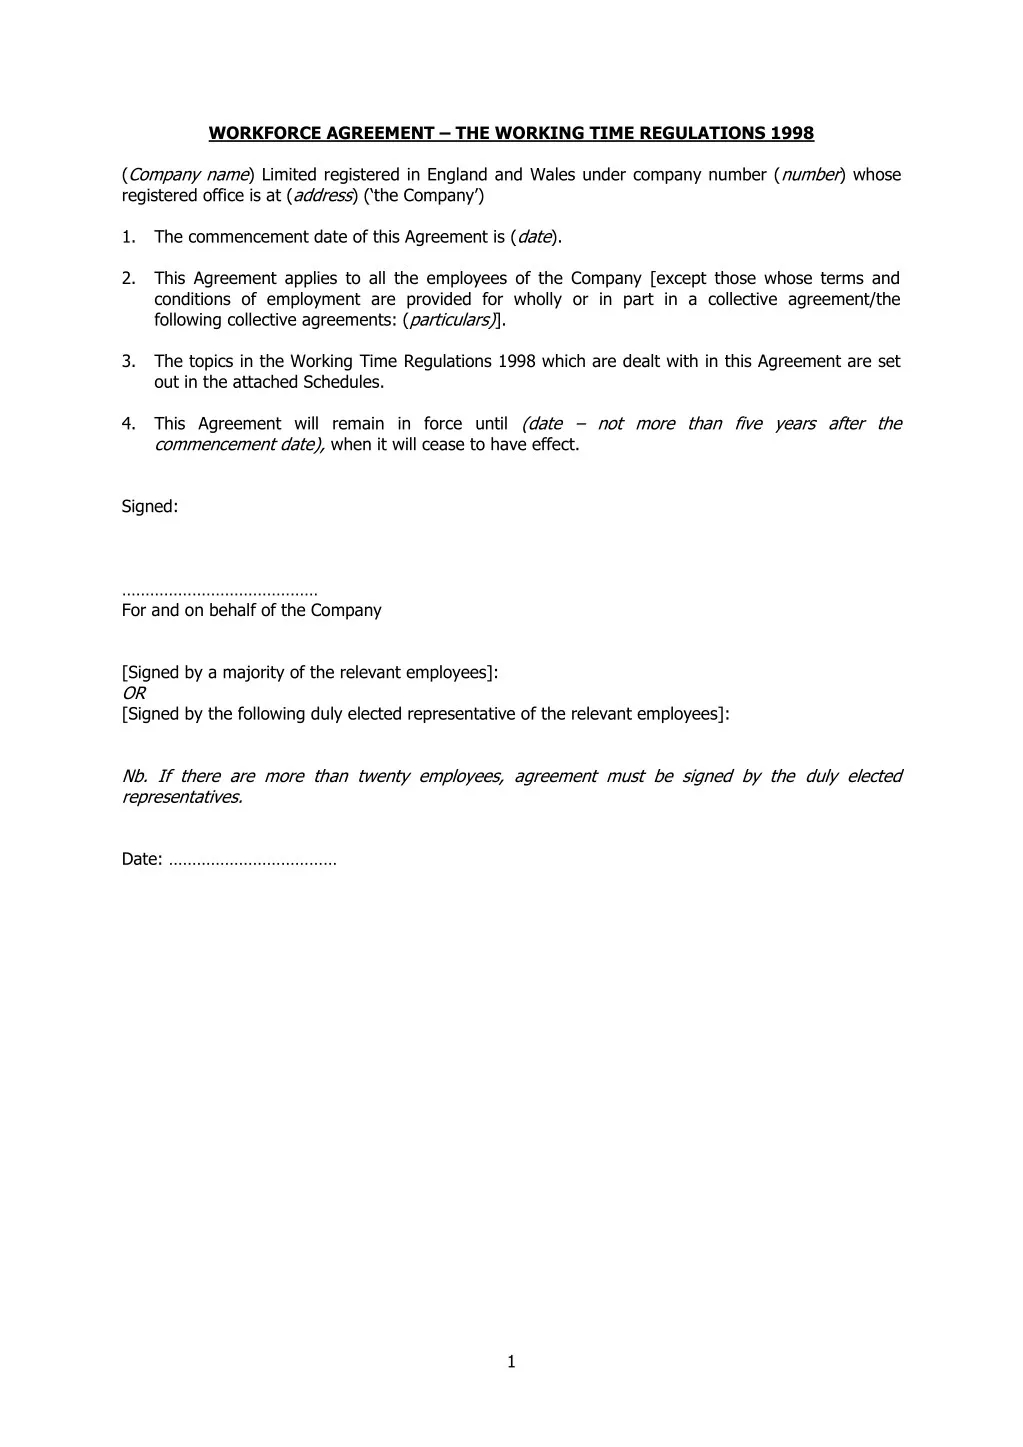 workforce agreement the working time regulations